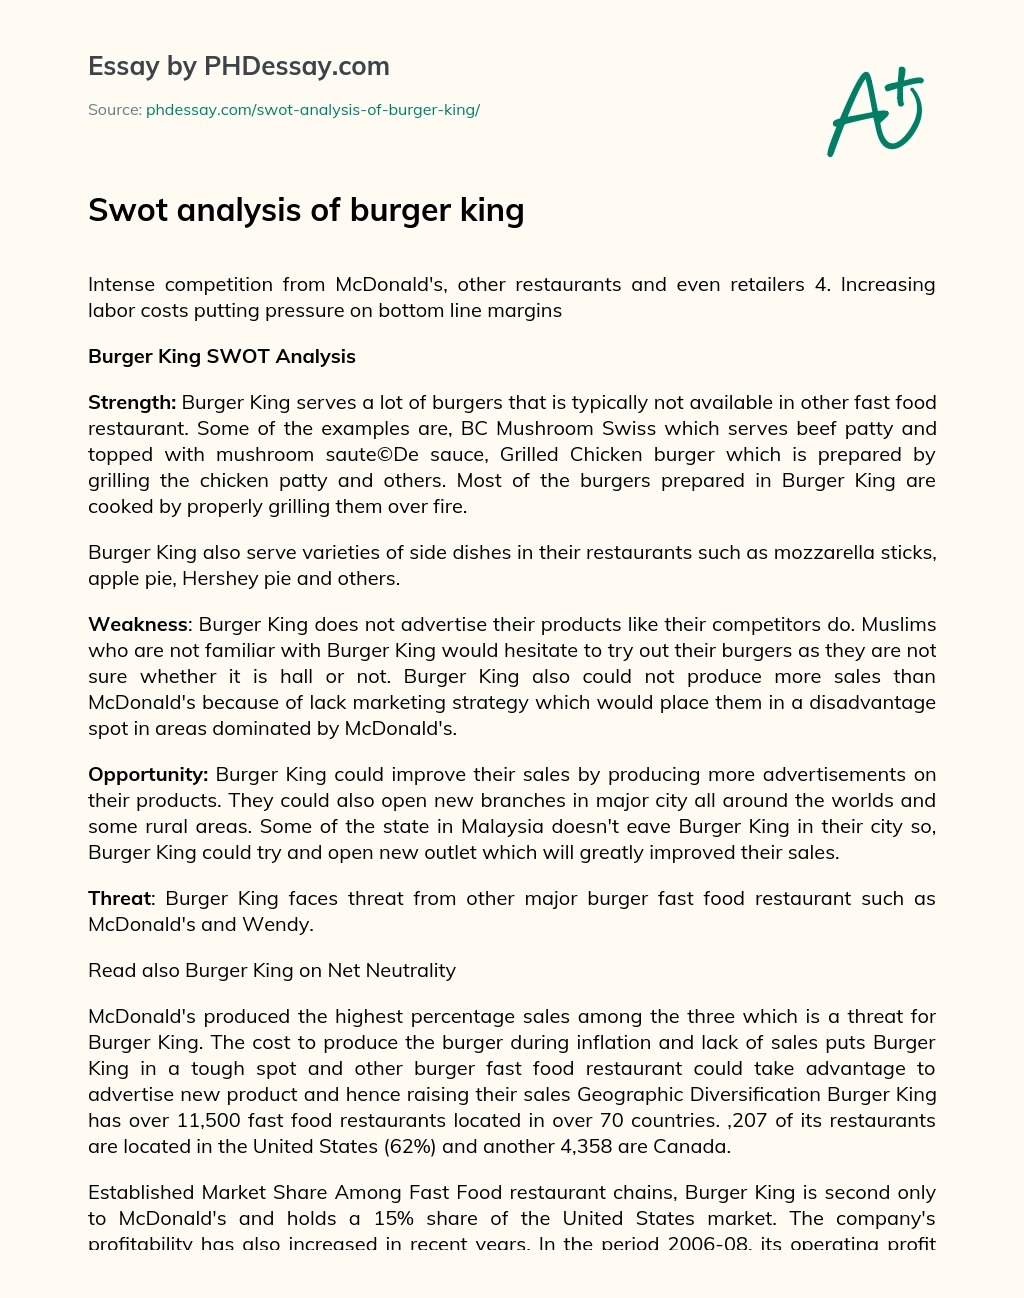 Challenges Faced by Burger King in the Fast Food Industry essay